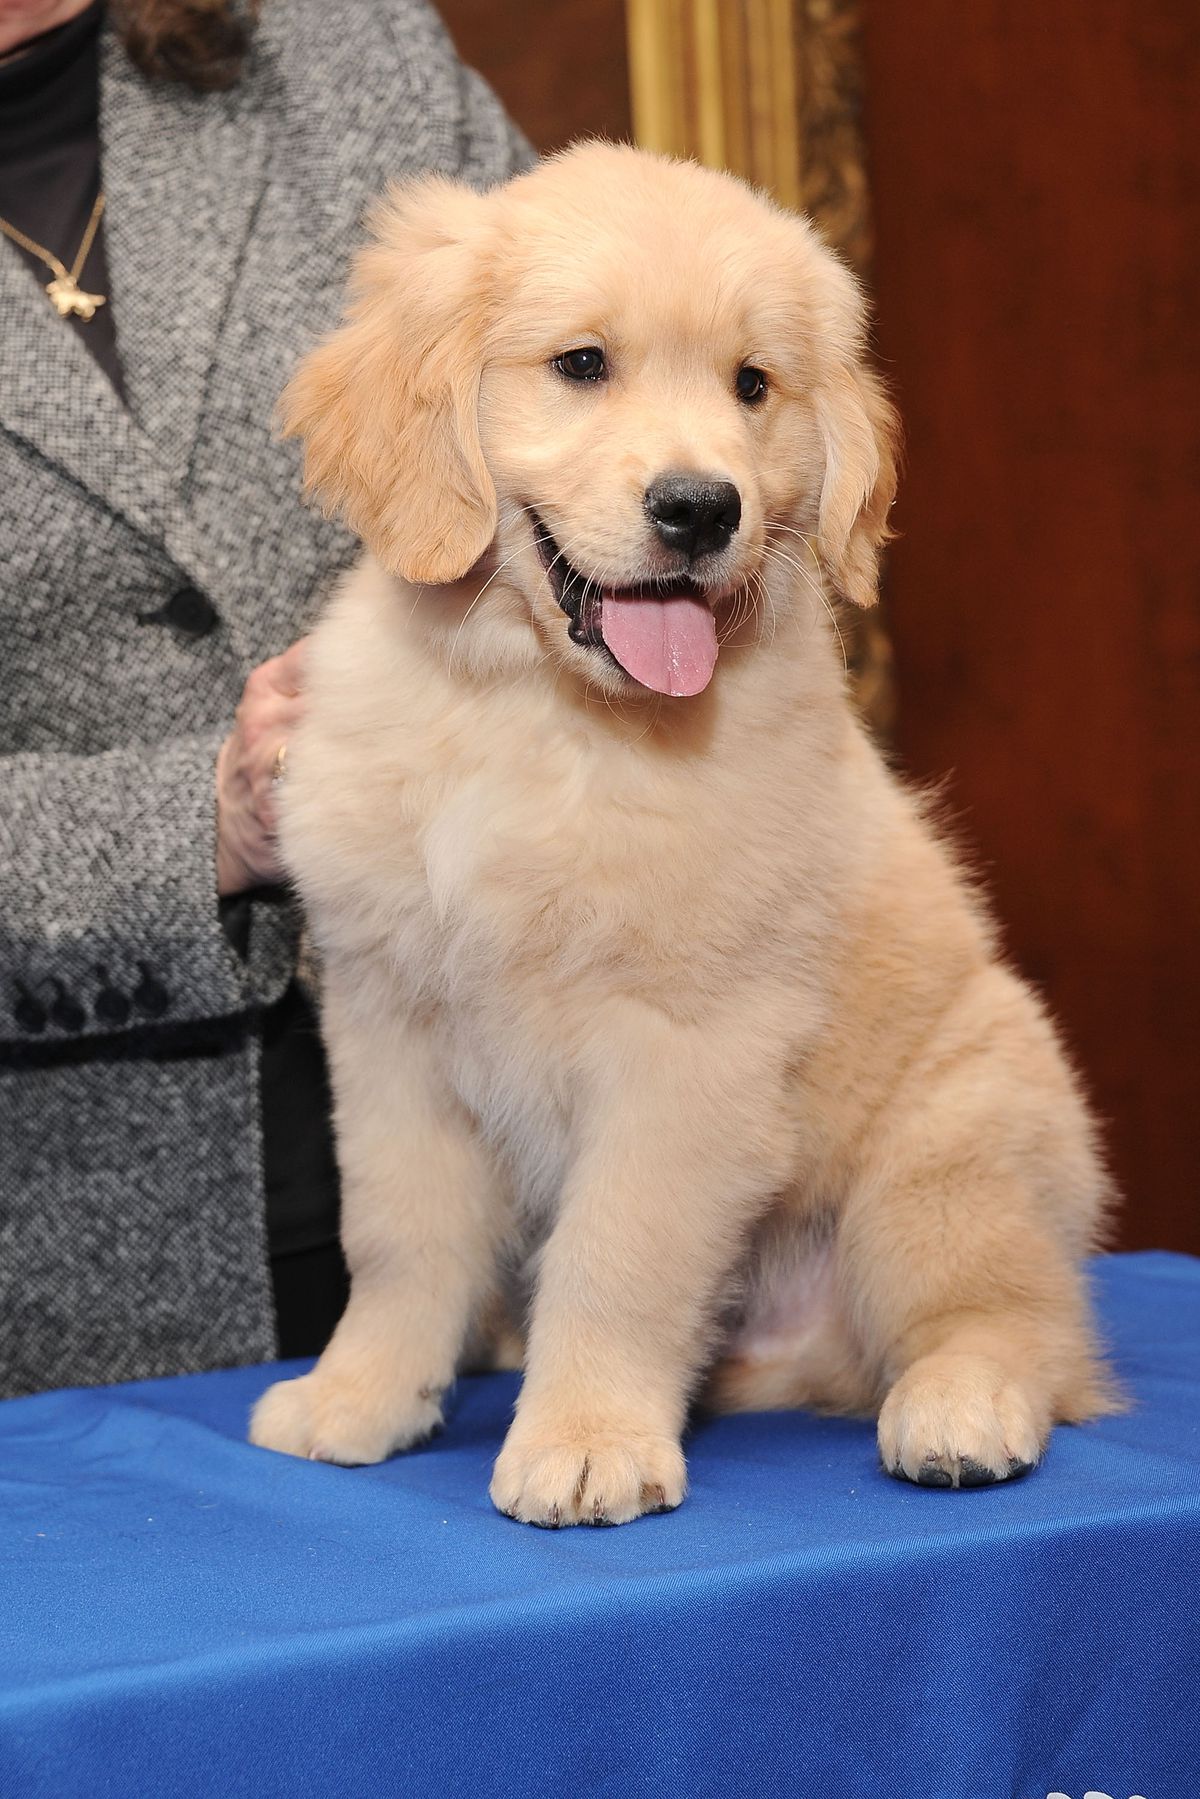 American Kennel Club Announces Most Popular Dogs In The U.S.